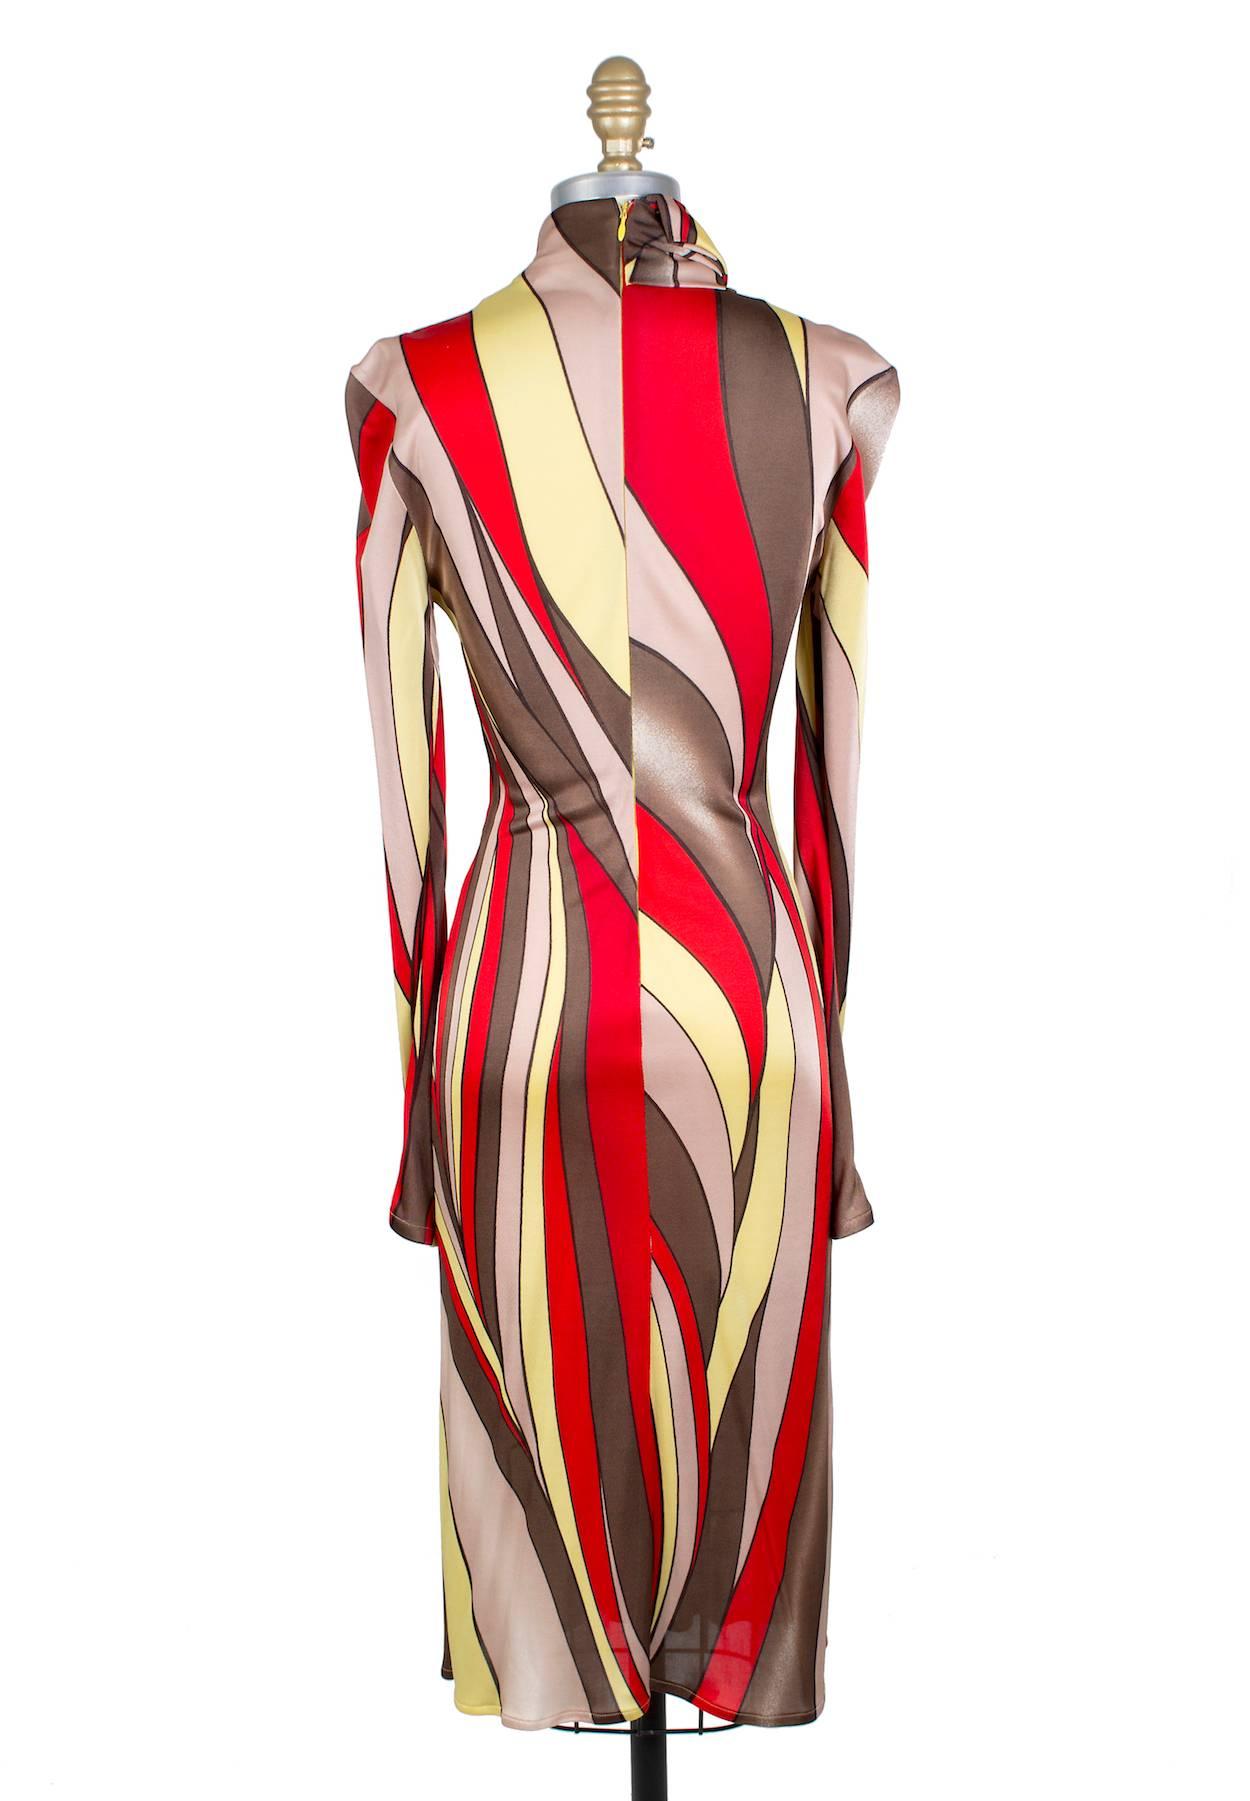 This is a stretch jersey dress from Versace circa 1990s.  It features a red yellow and brown curve print.  It has a high mock turtleneck collar with a twist knot detail.  The closure is a hidden zipper down the back.  

16